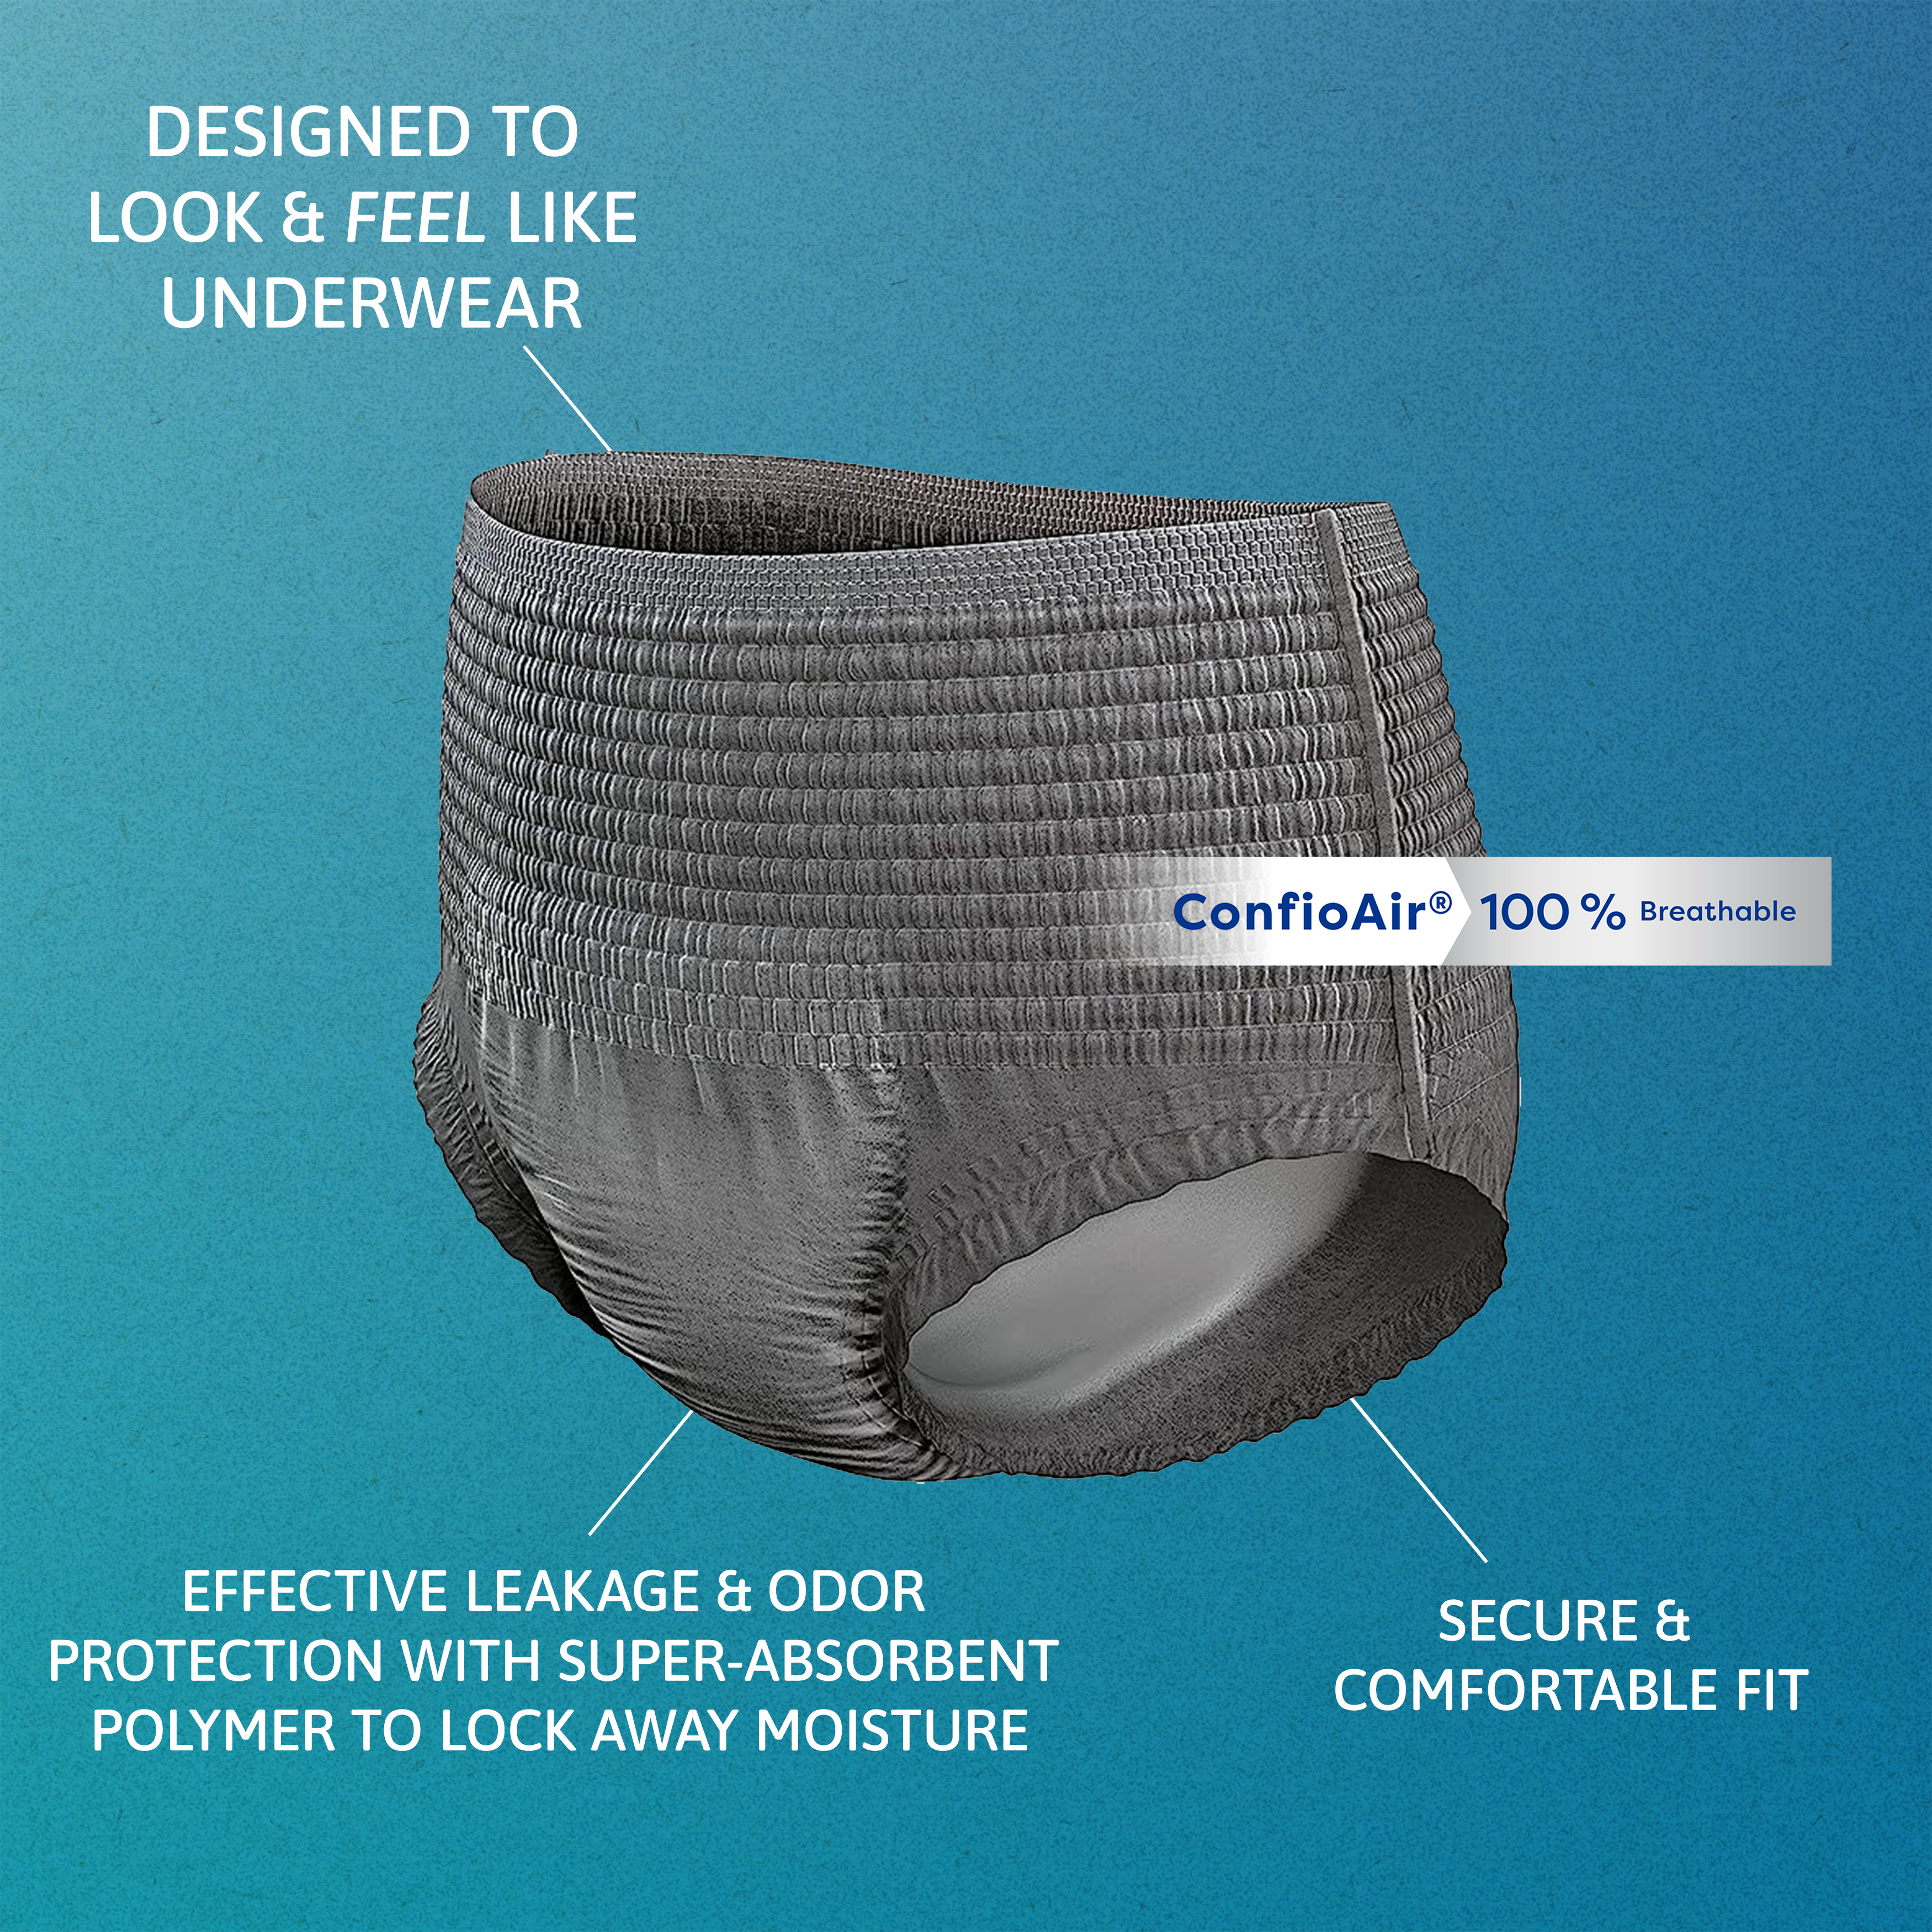 An image of Proskin underwear with words "Designed to look and feel like underwear"